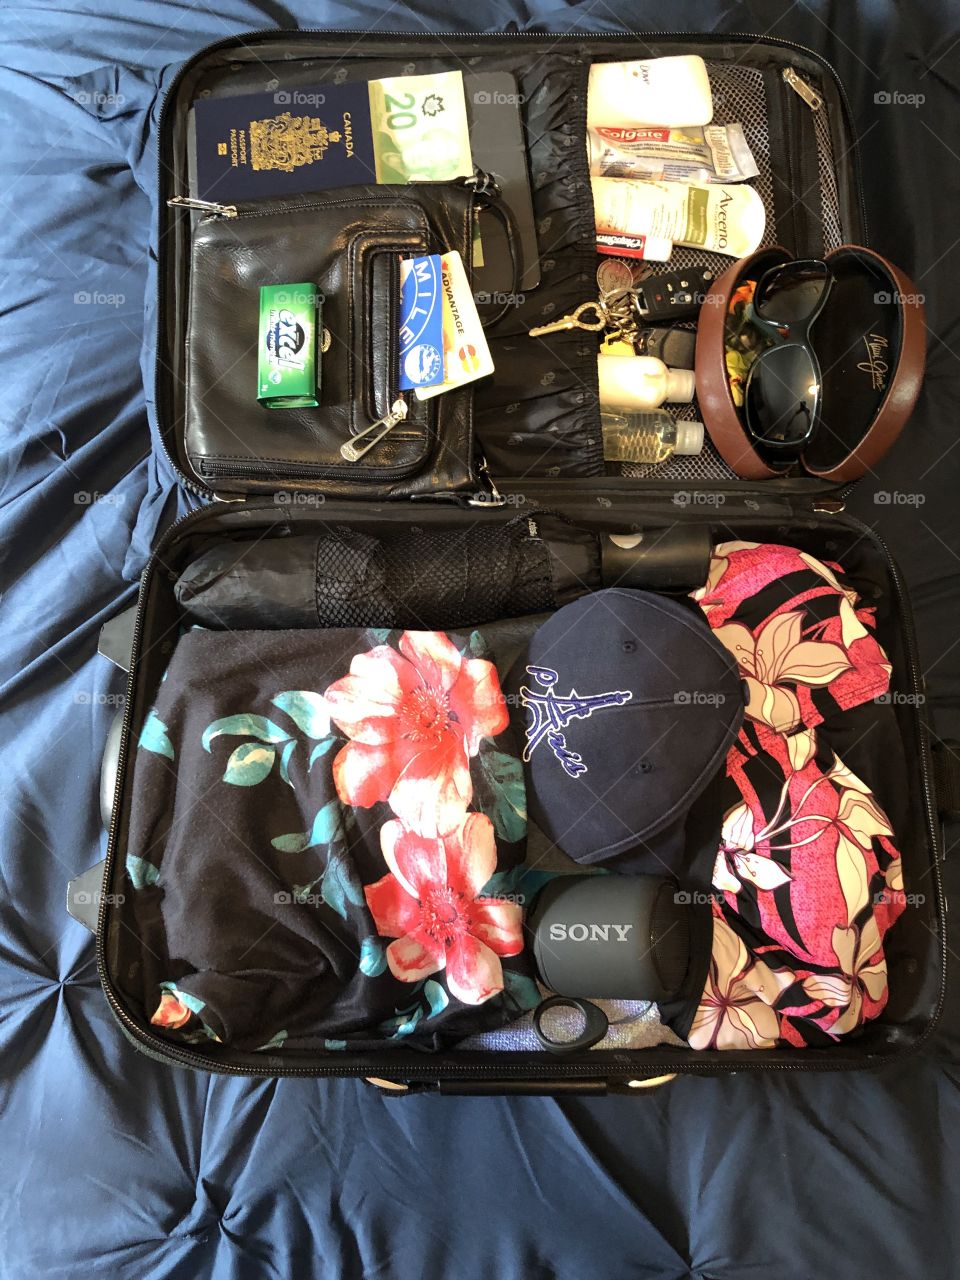 My Suitcase Is Packed! I’m Ready For Vacation!